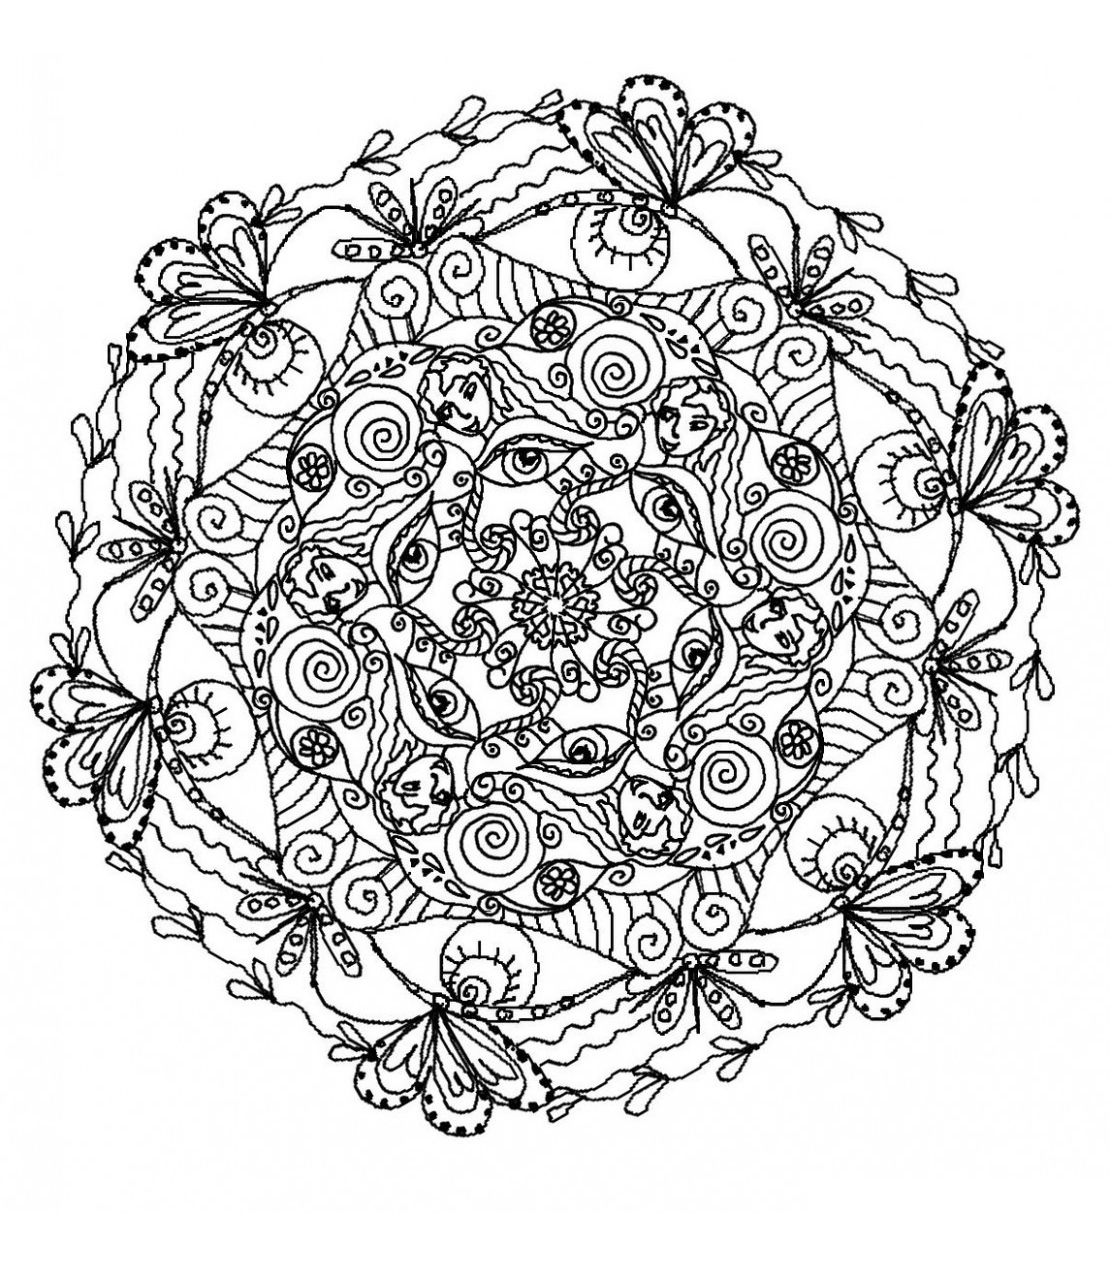 Plants and natural patterns for this refreshing Mandala for adult. Colors in green tones preferred, of course !